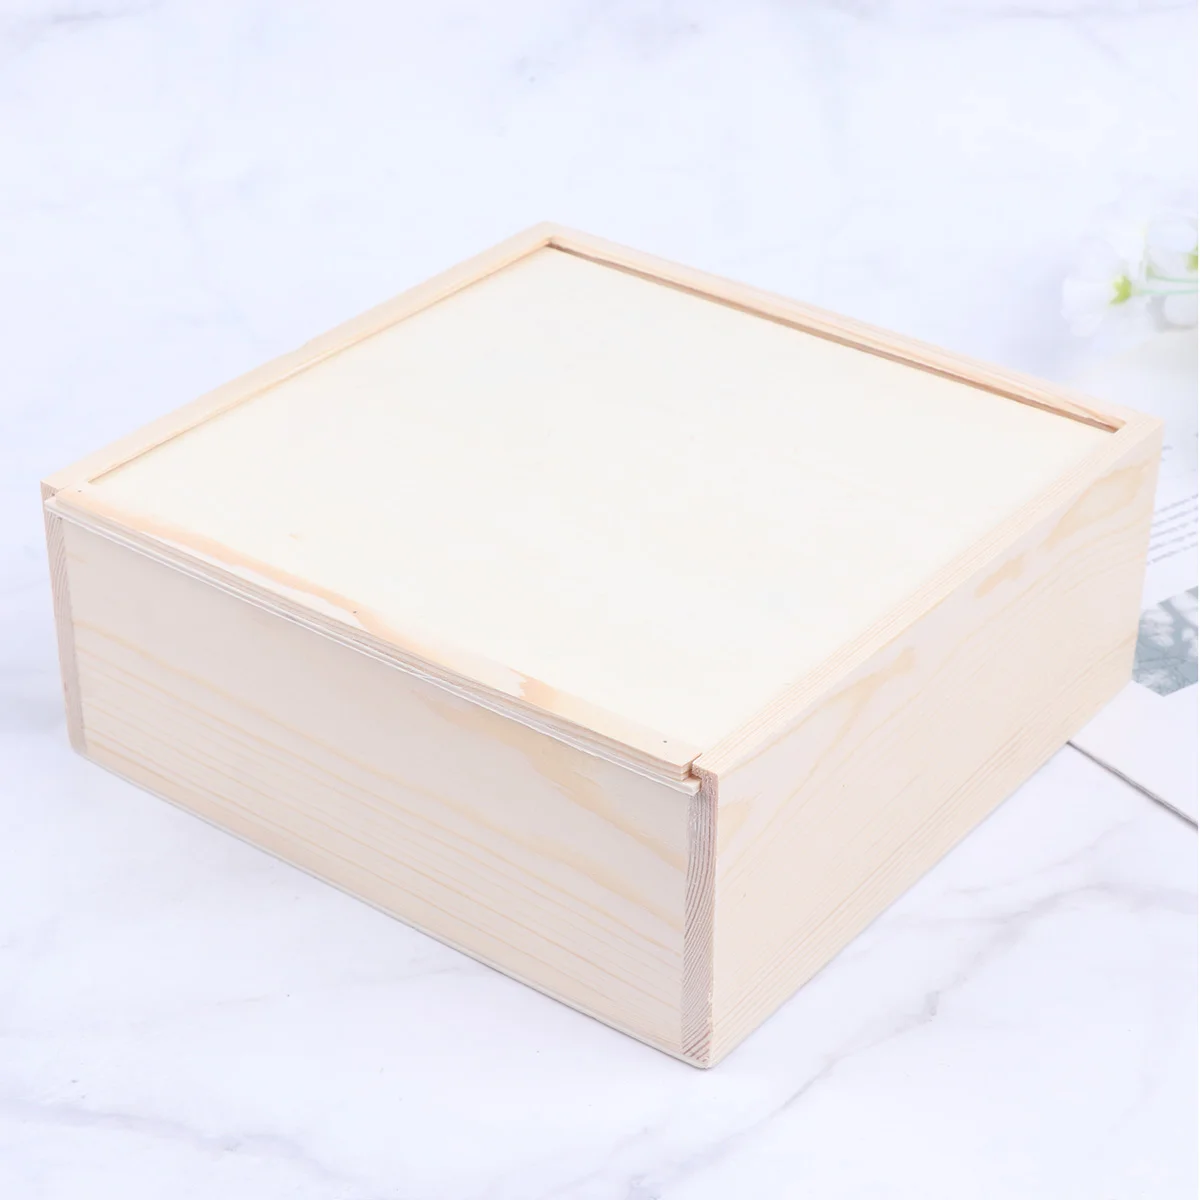 Operitacx Jewelry Organizer Tray Unfinished Pine Wood Box Wooden Gift Box with Push Cover for Hobbies and Home Storage Bracelet 2 pcs pencil pine holder child makeup brush kids storage organizer for toys wood tools pot